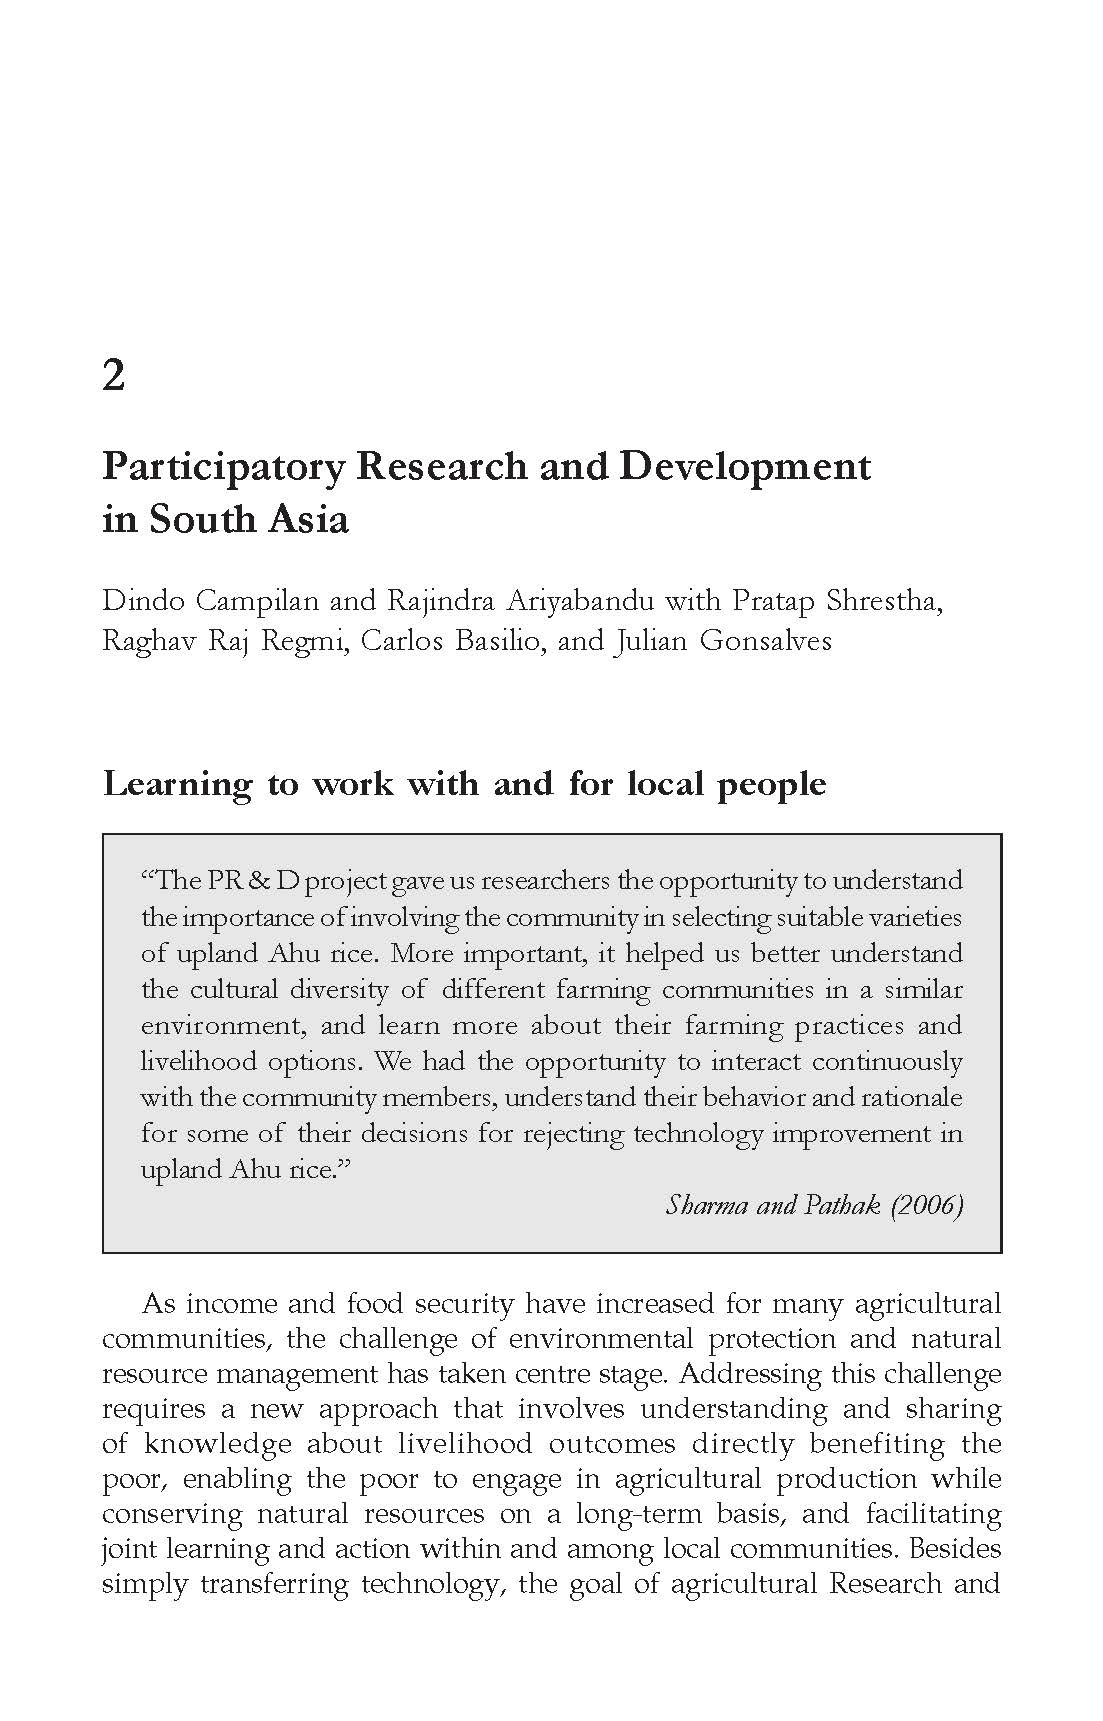 Participatory research and development in South Asia.